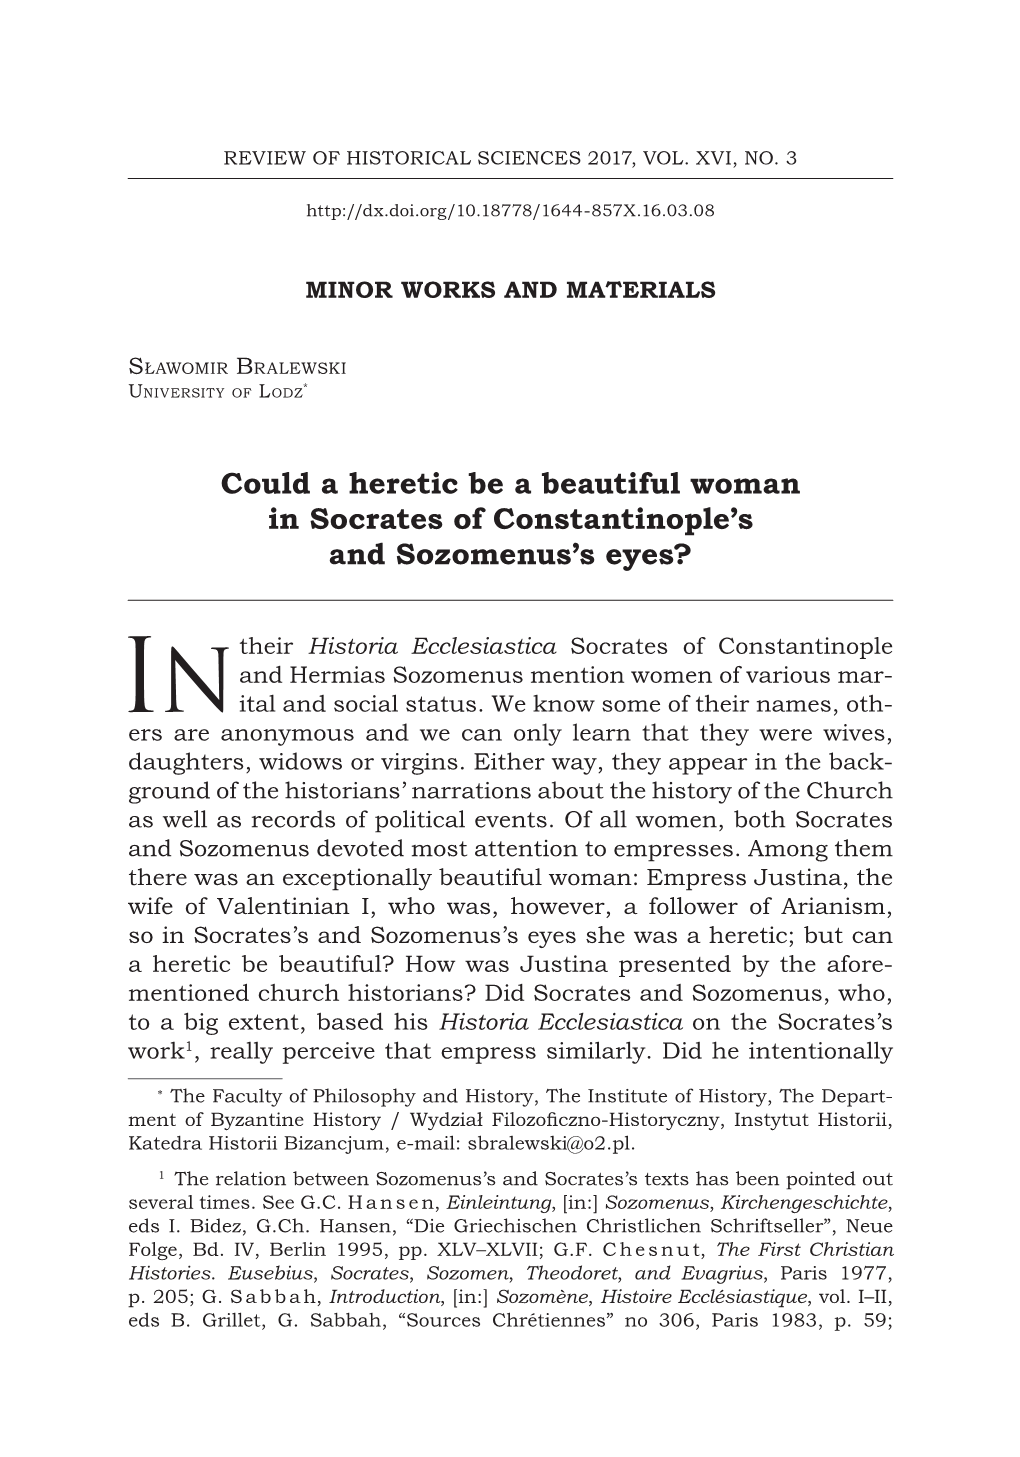 Could a Heretic Be a Beautiful Woman in Socrates of Constantinople's and Sozomenus's Eyes?